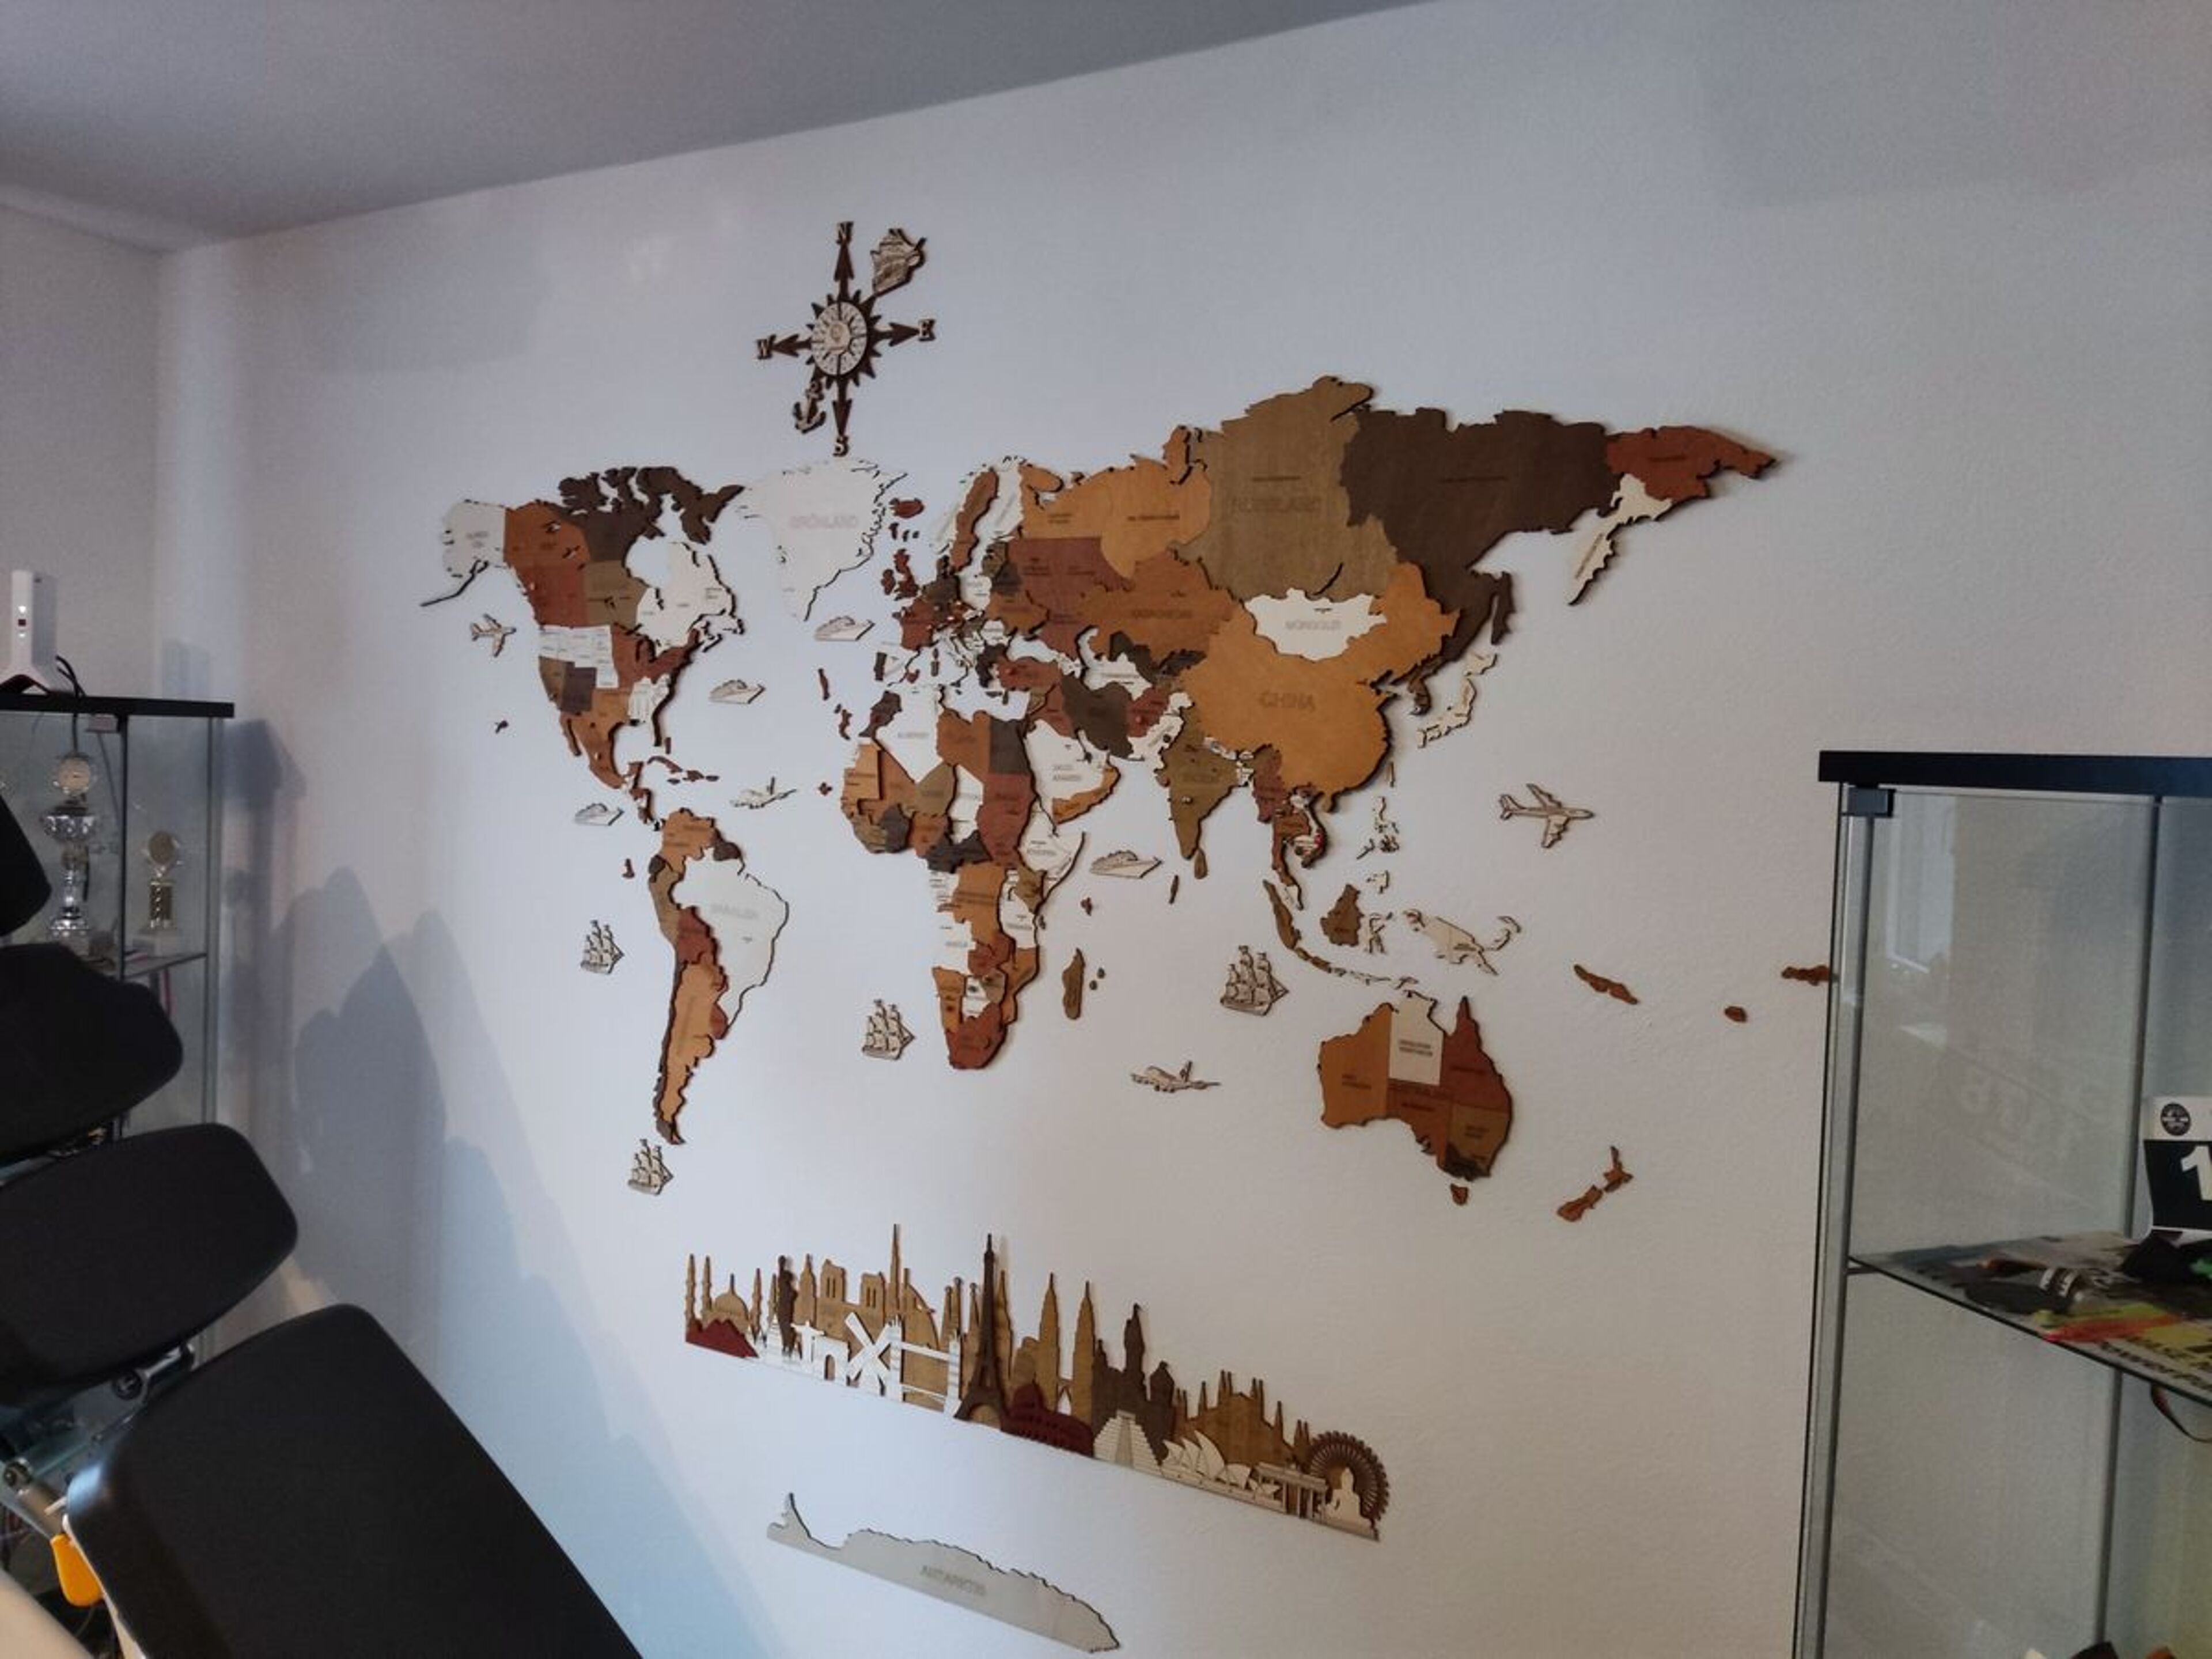 Review for Wooden World Map Wall Decoration - image from Wase N.